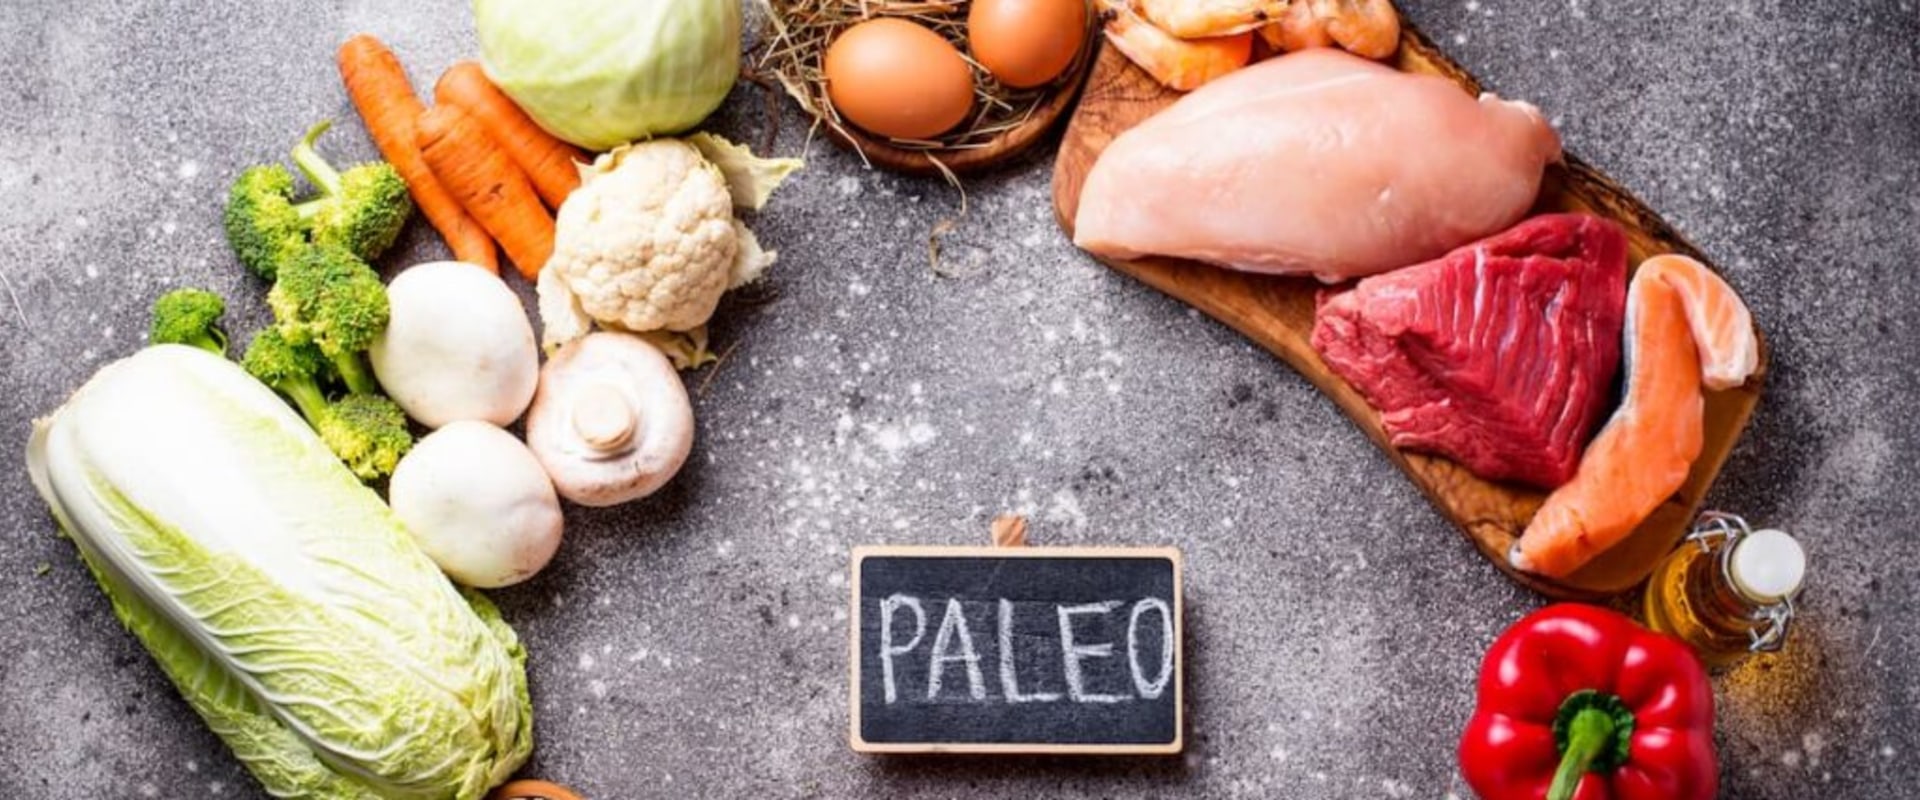 Who should not eat paleo?